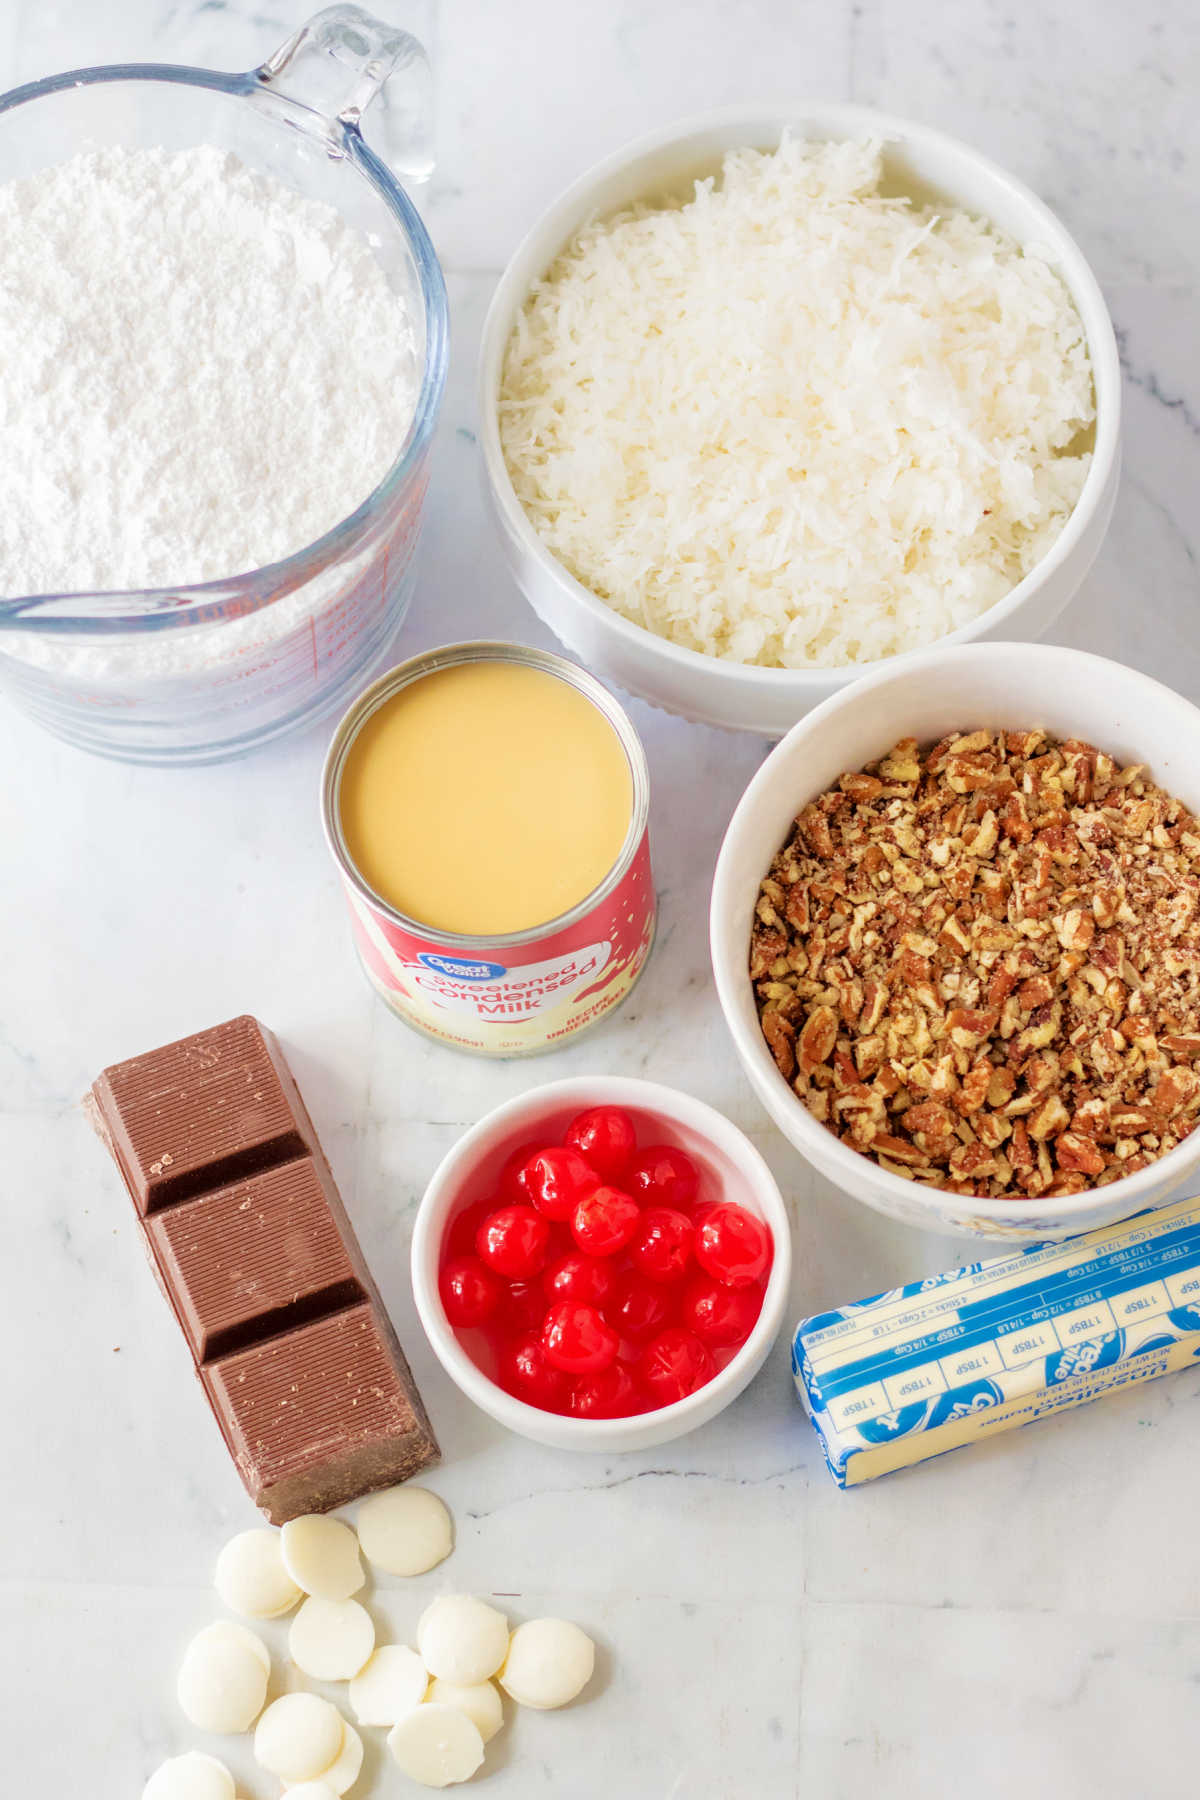 Ingredients ready to be made into cherry coconut bonbons.